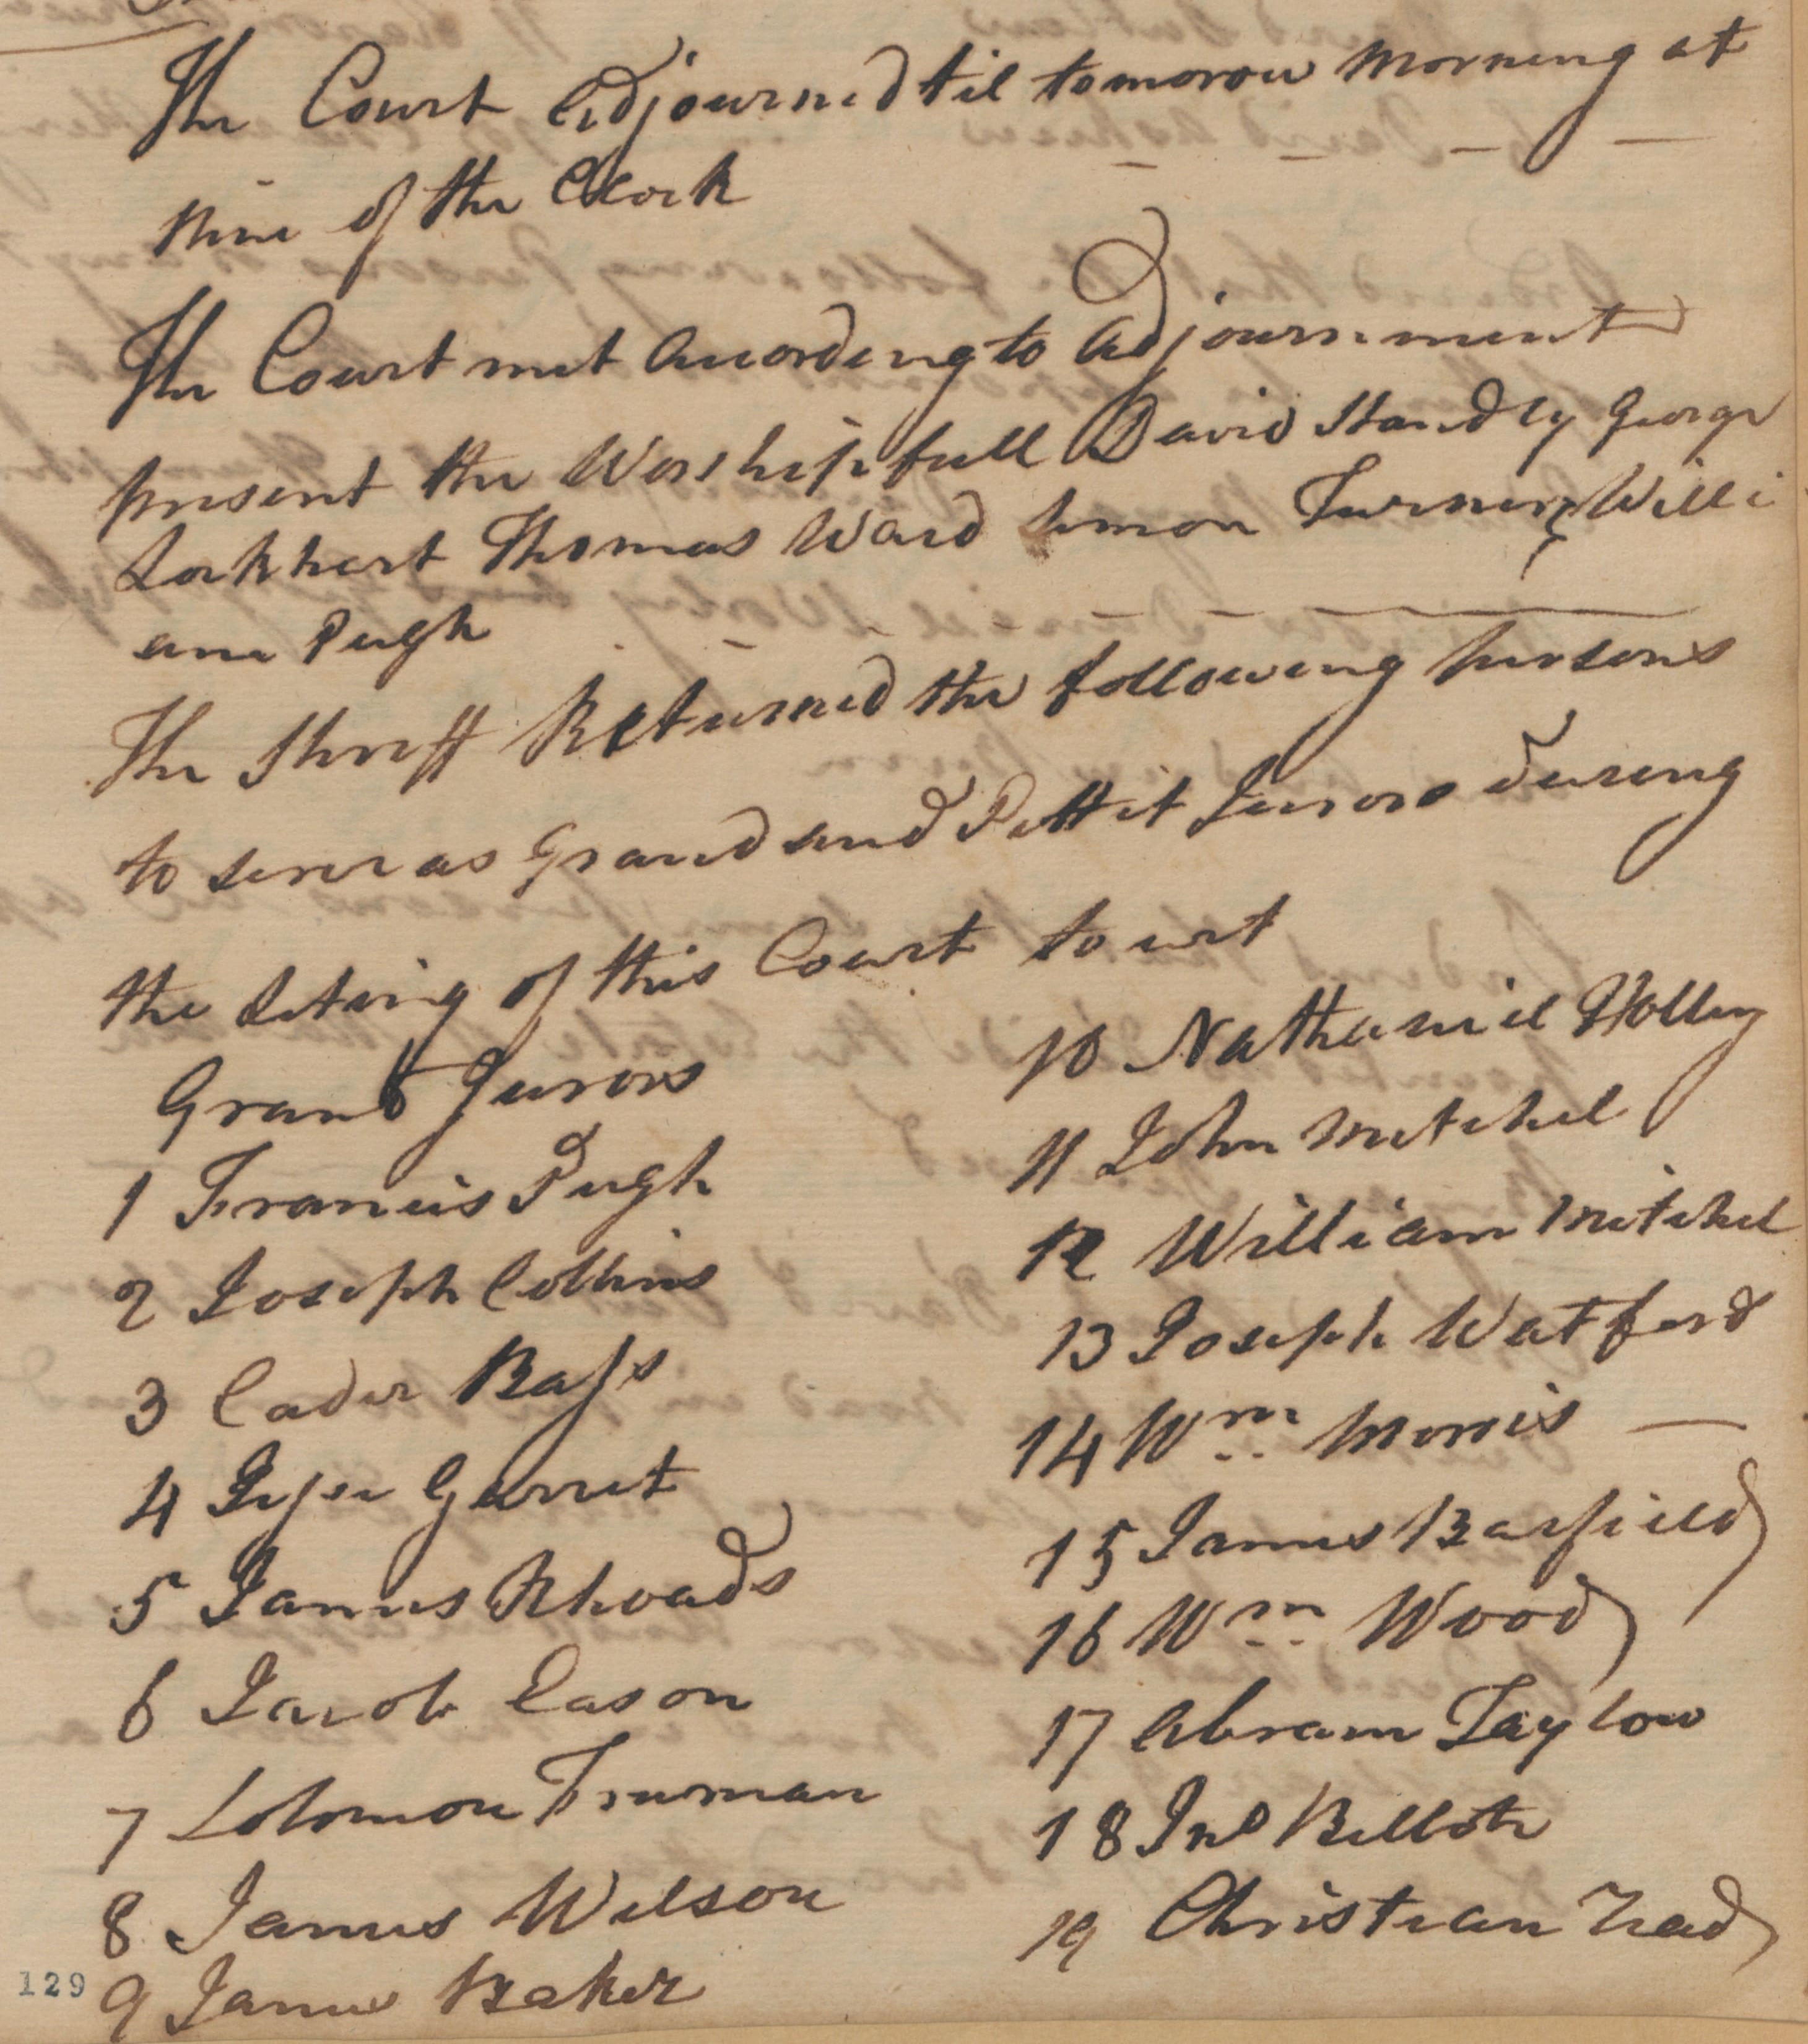 Extract of Minutes of the Bertie County Court of Pleas and Quarter Sessions, September-October 1777, page 4